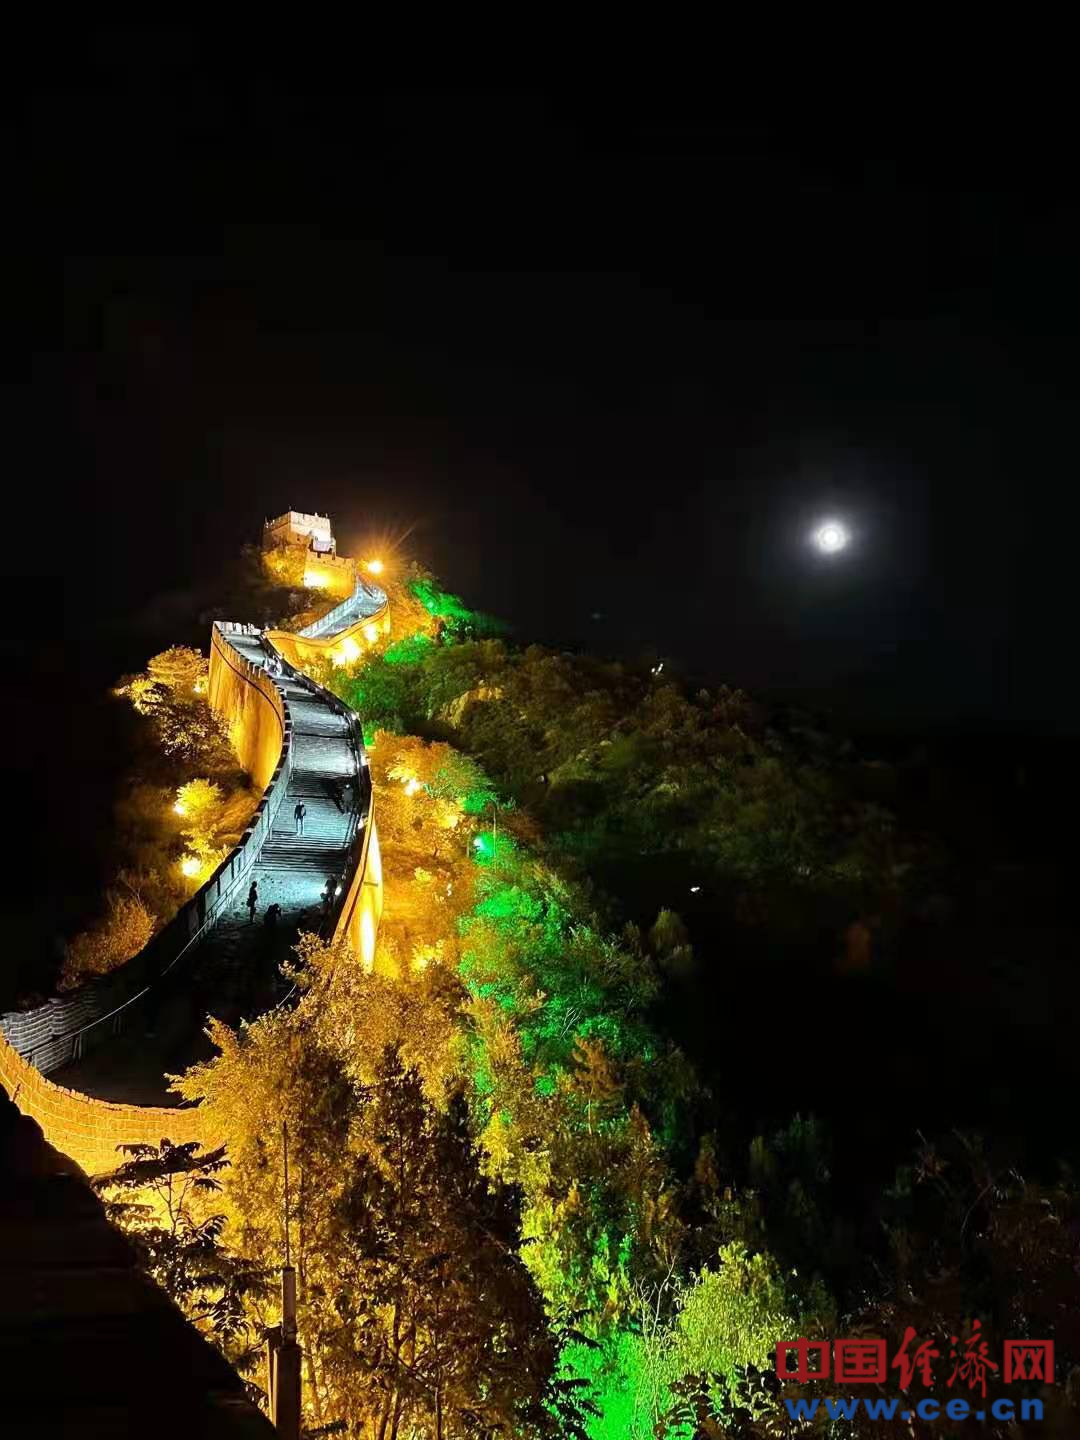 Light show held at Great Wall of China to celebrate seven decades of Pak-China friendship